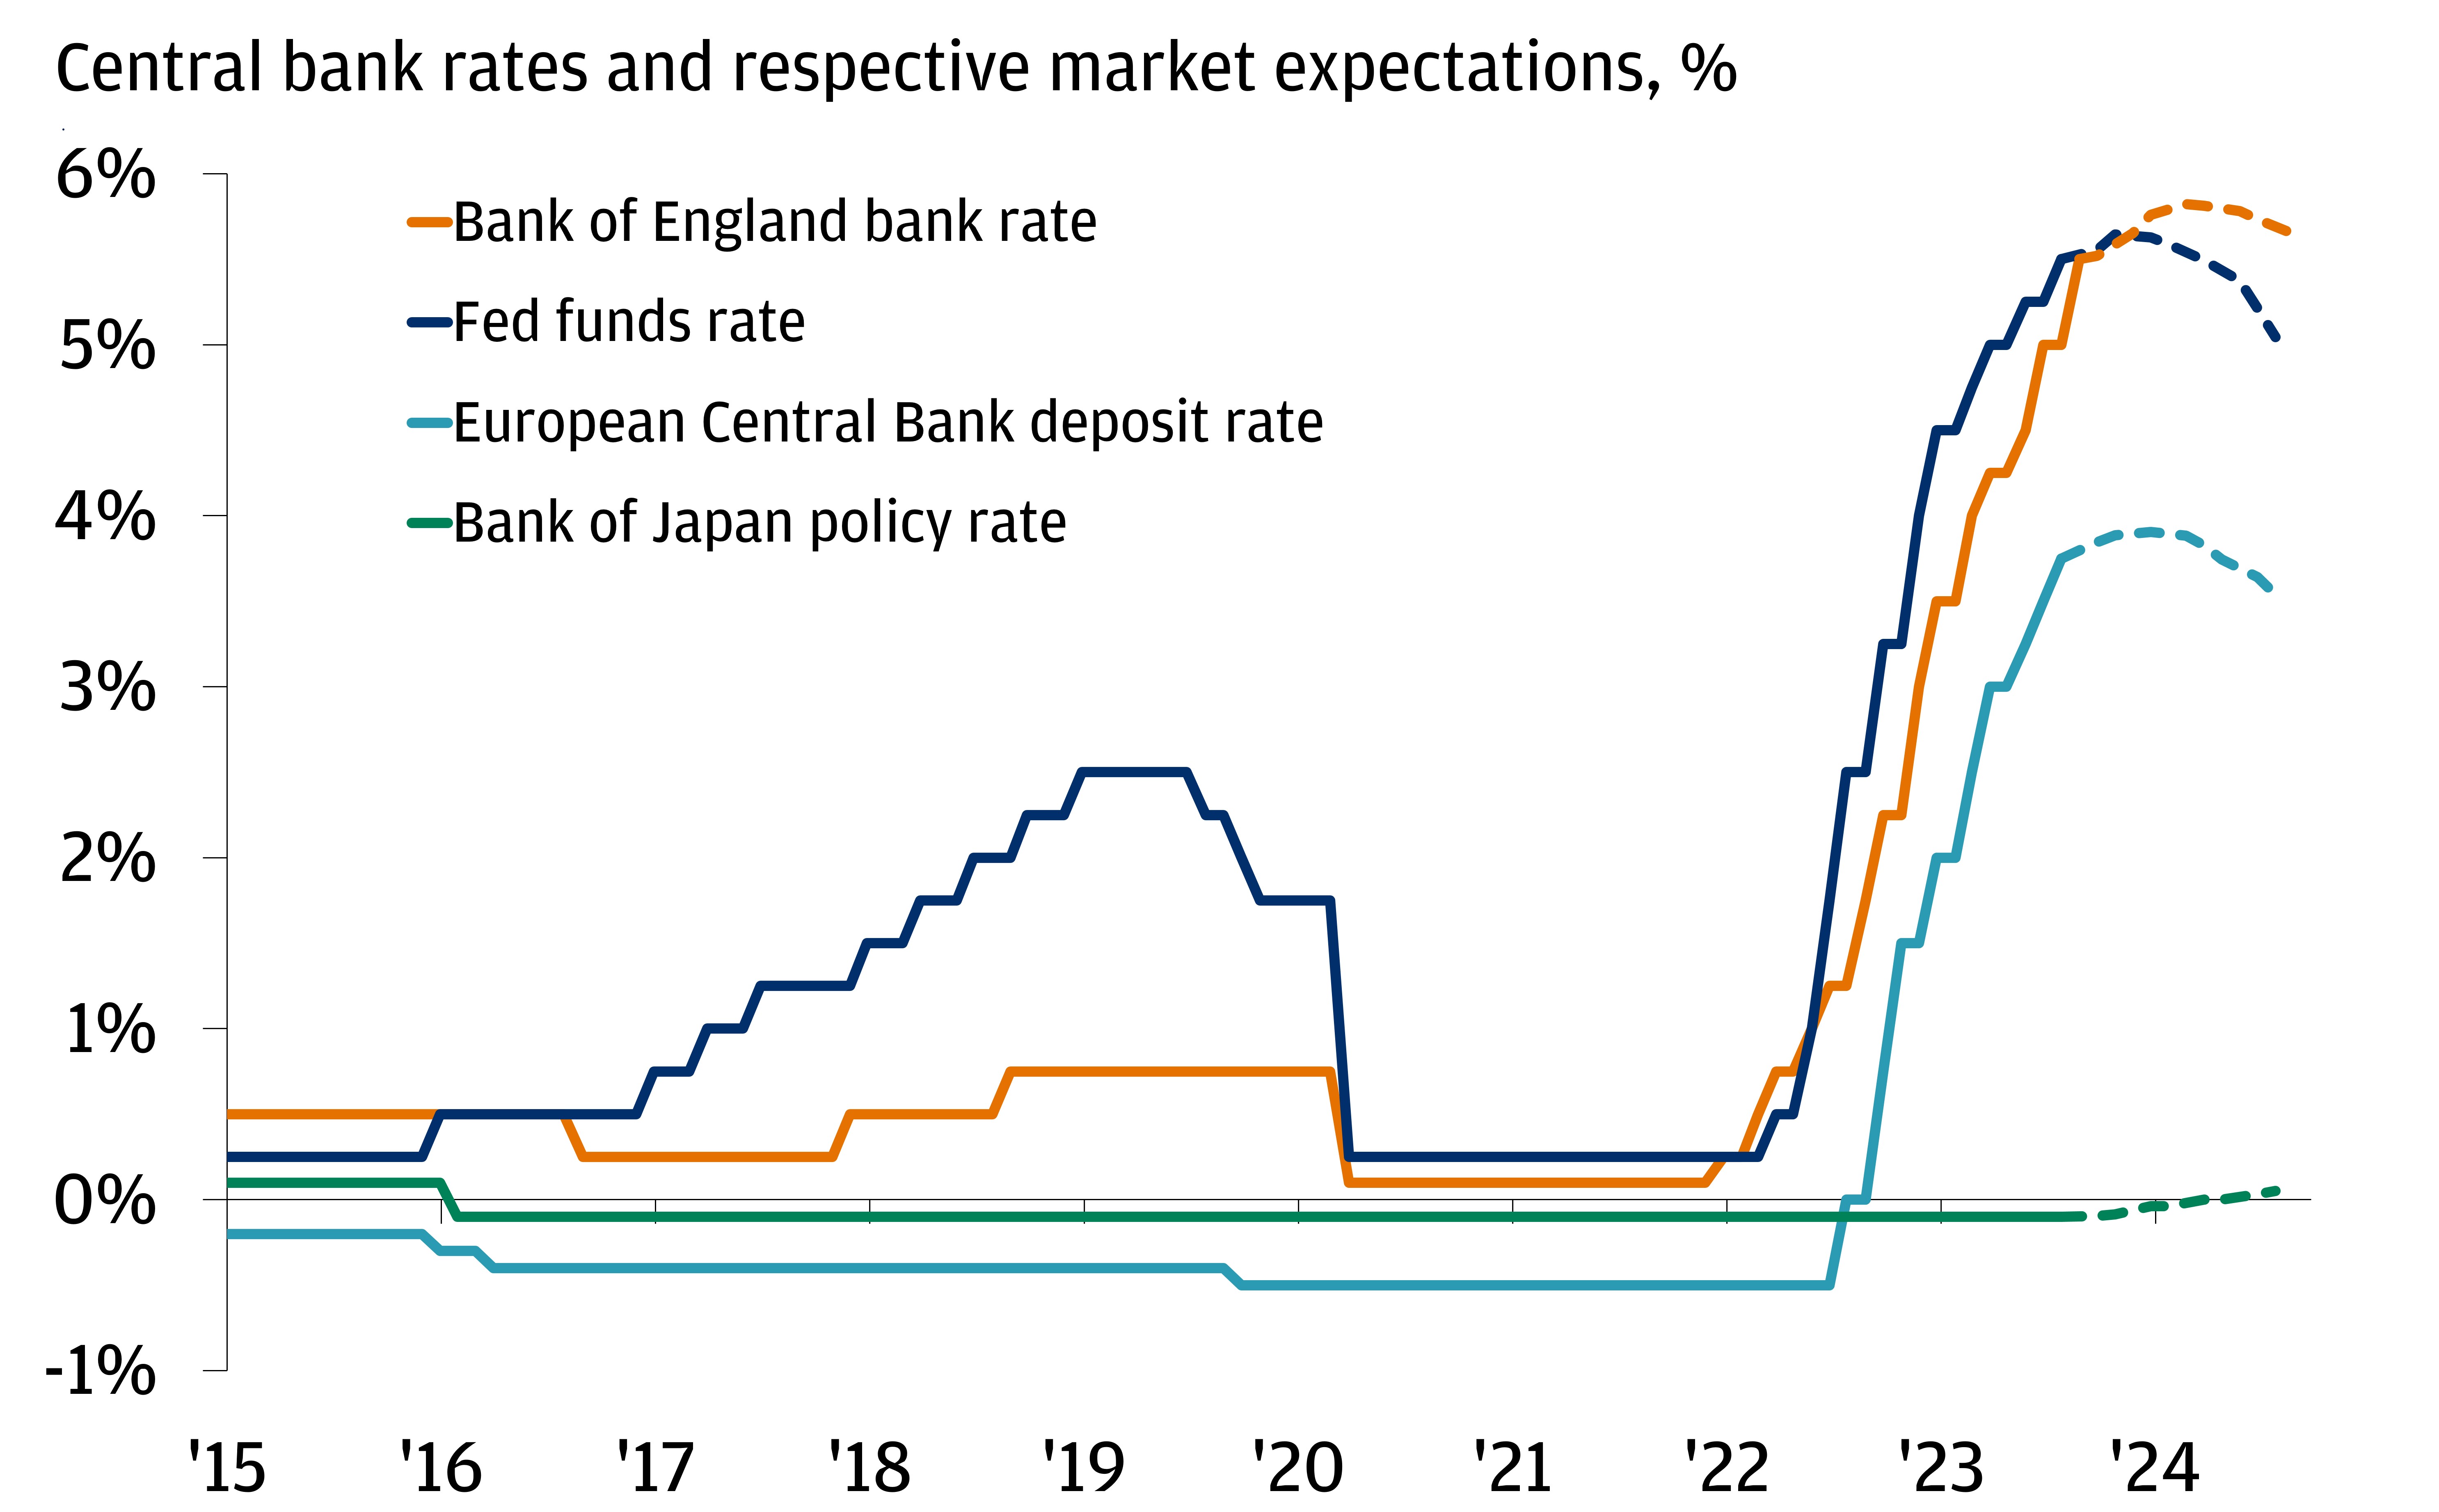 The chart describes central bank rates and respective market expectations as percentages.